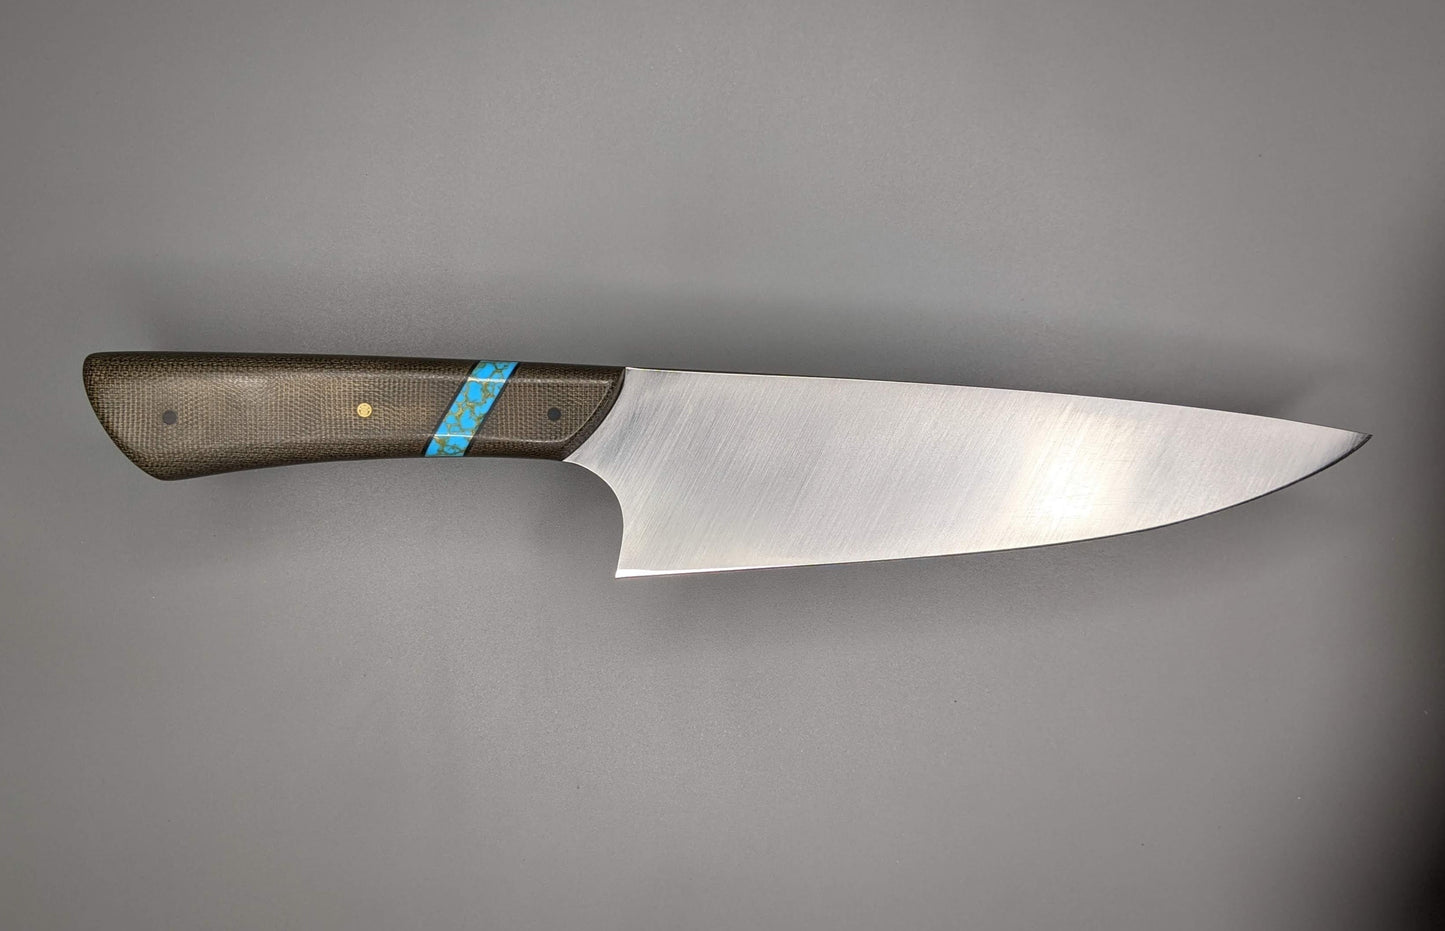 7" Chef Knife with Green Micarta handle